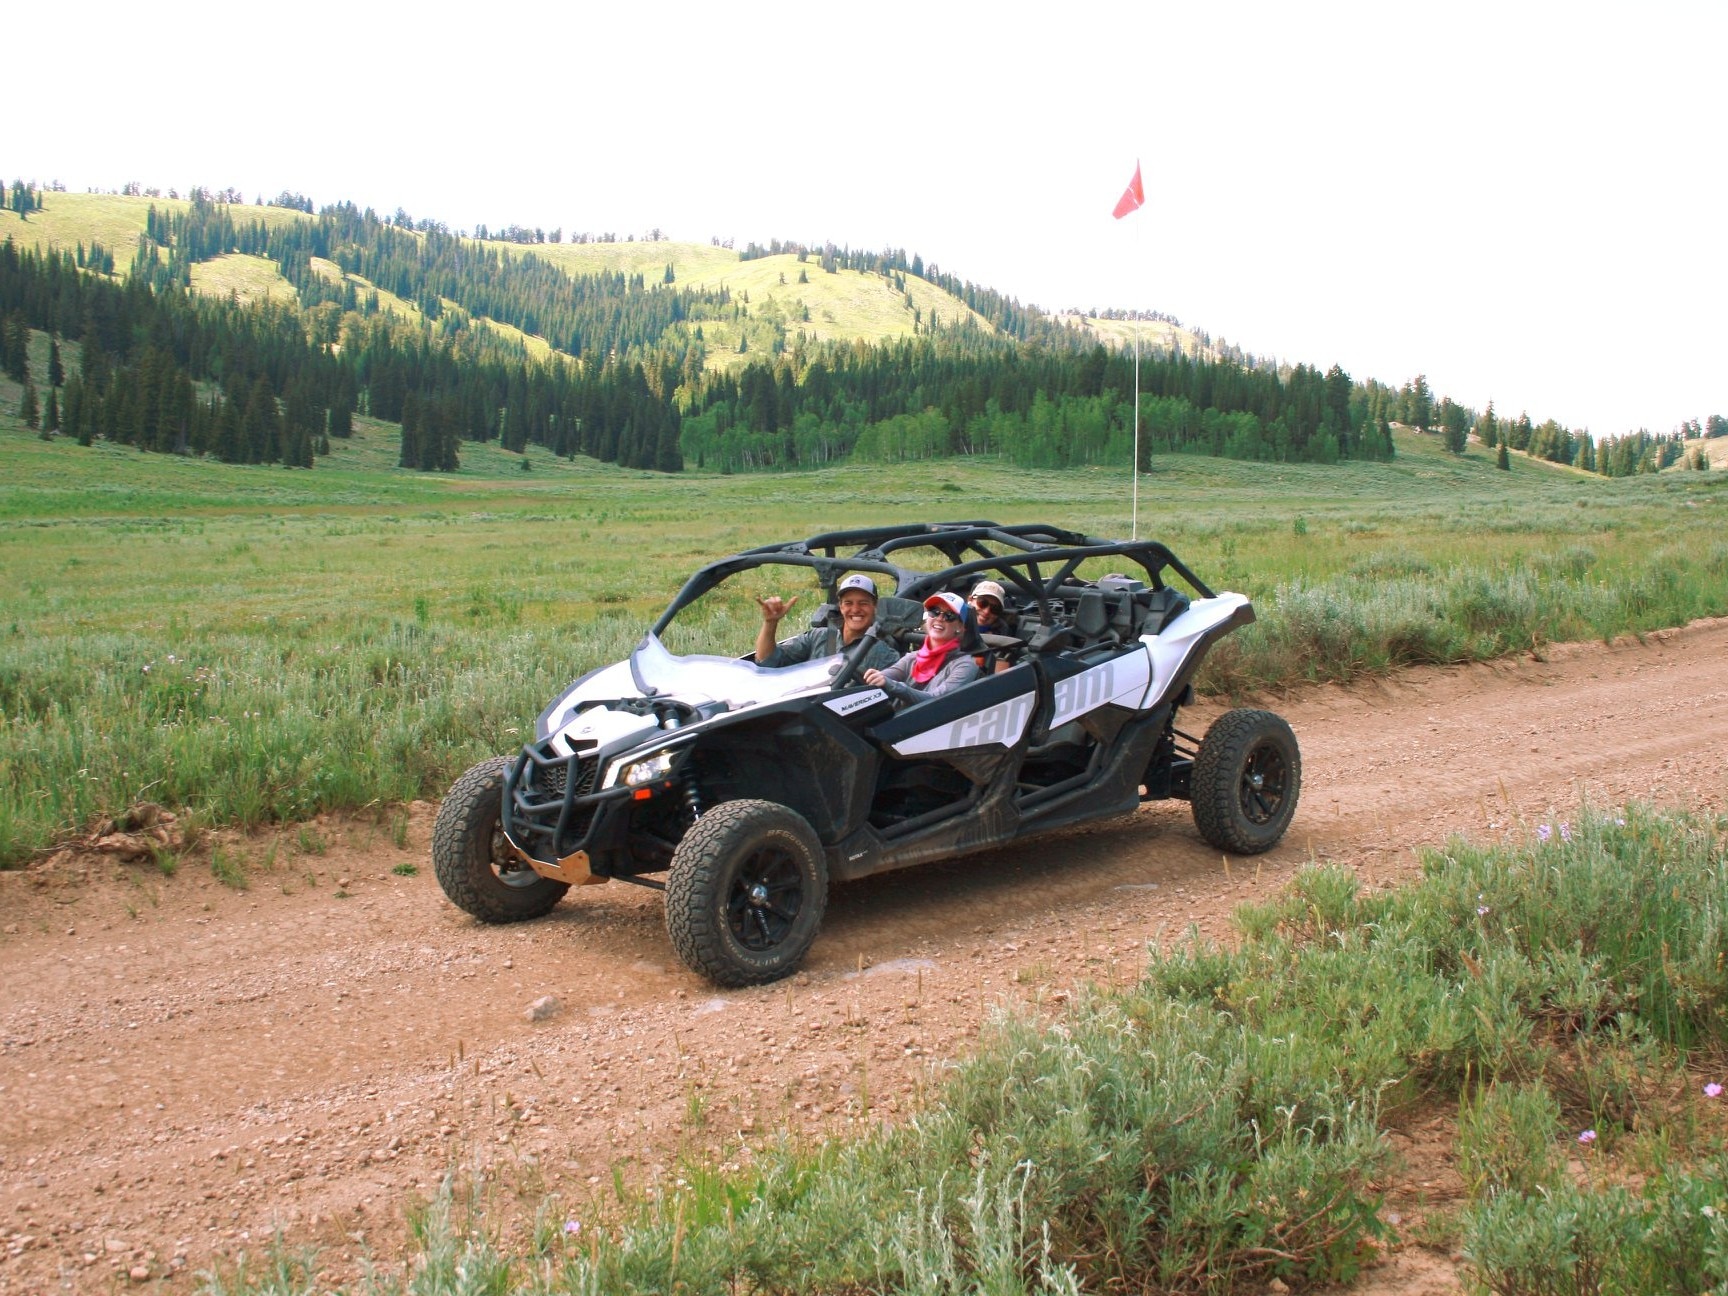 Family in Can-Am Maverick